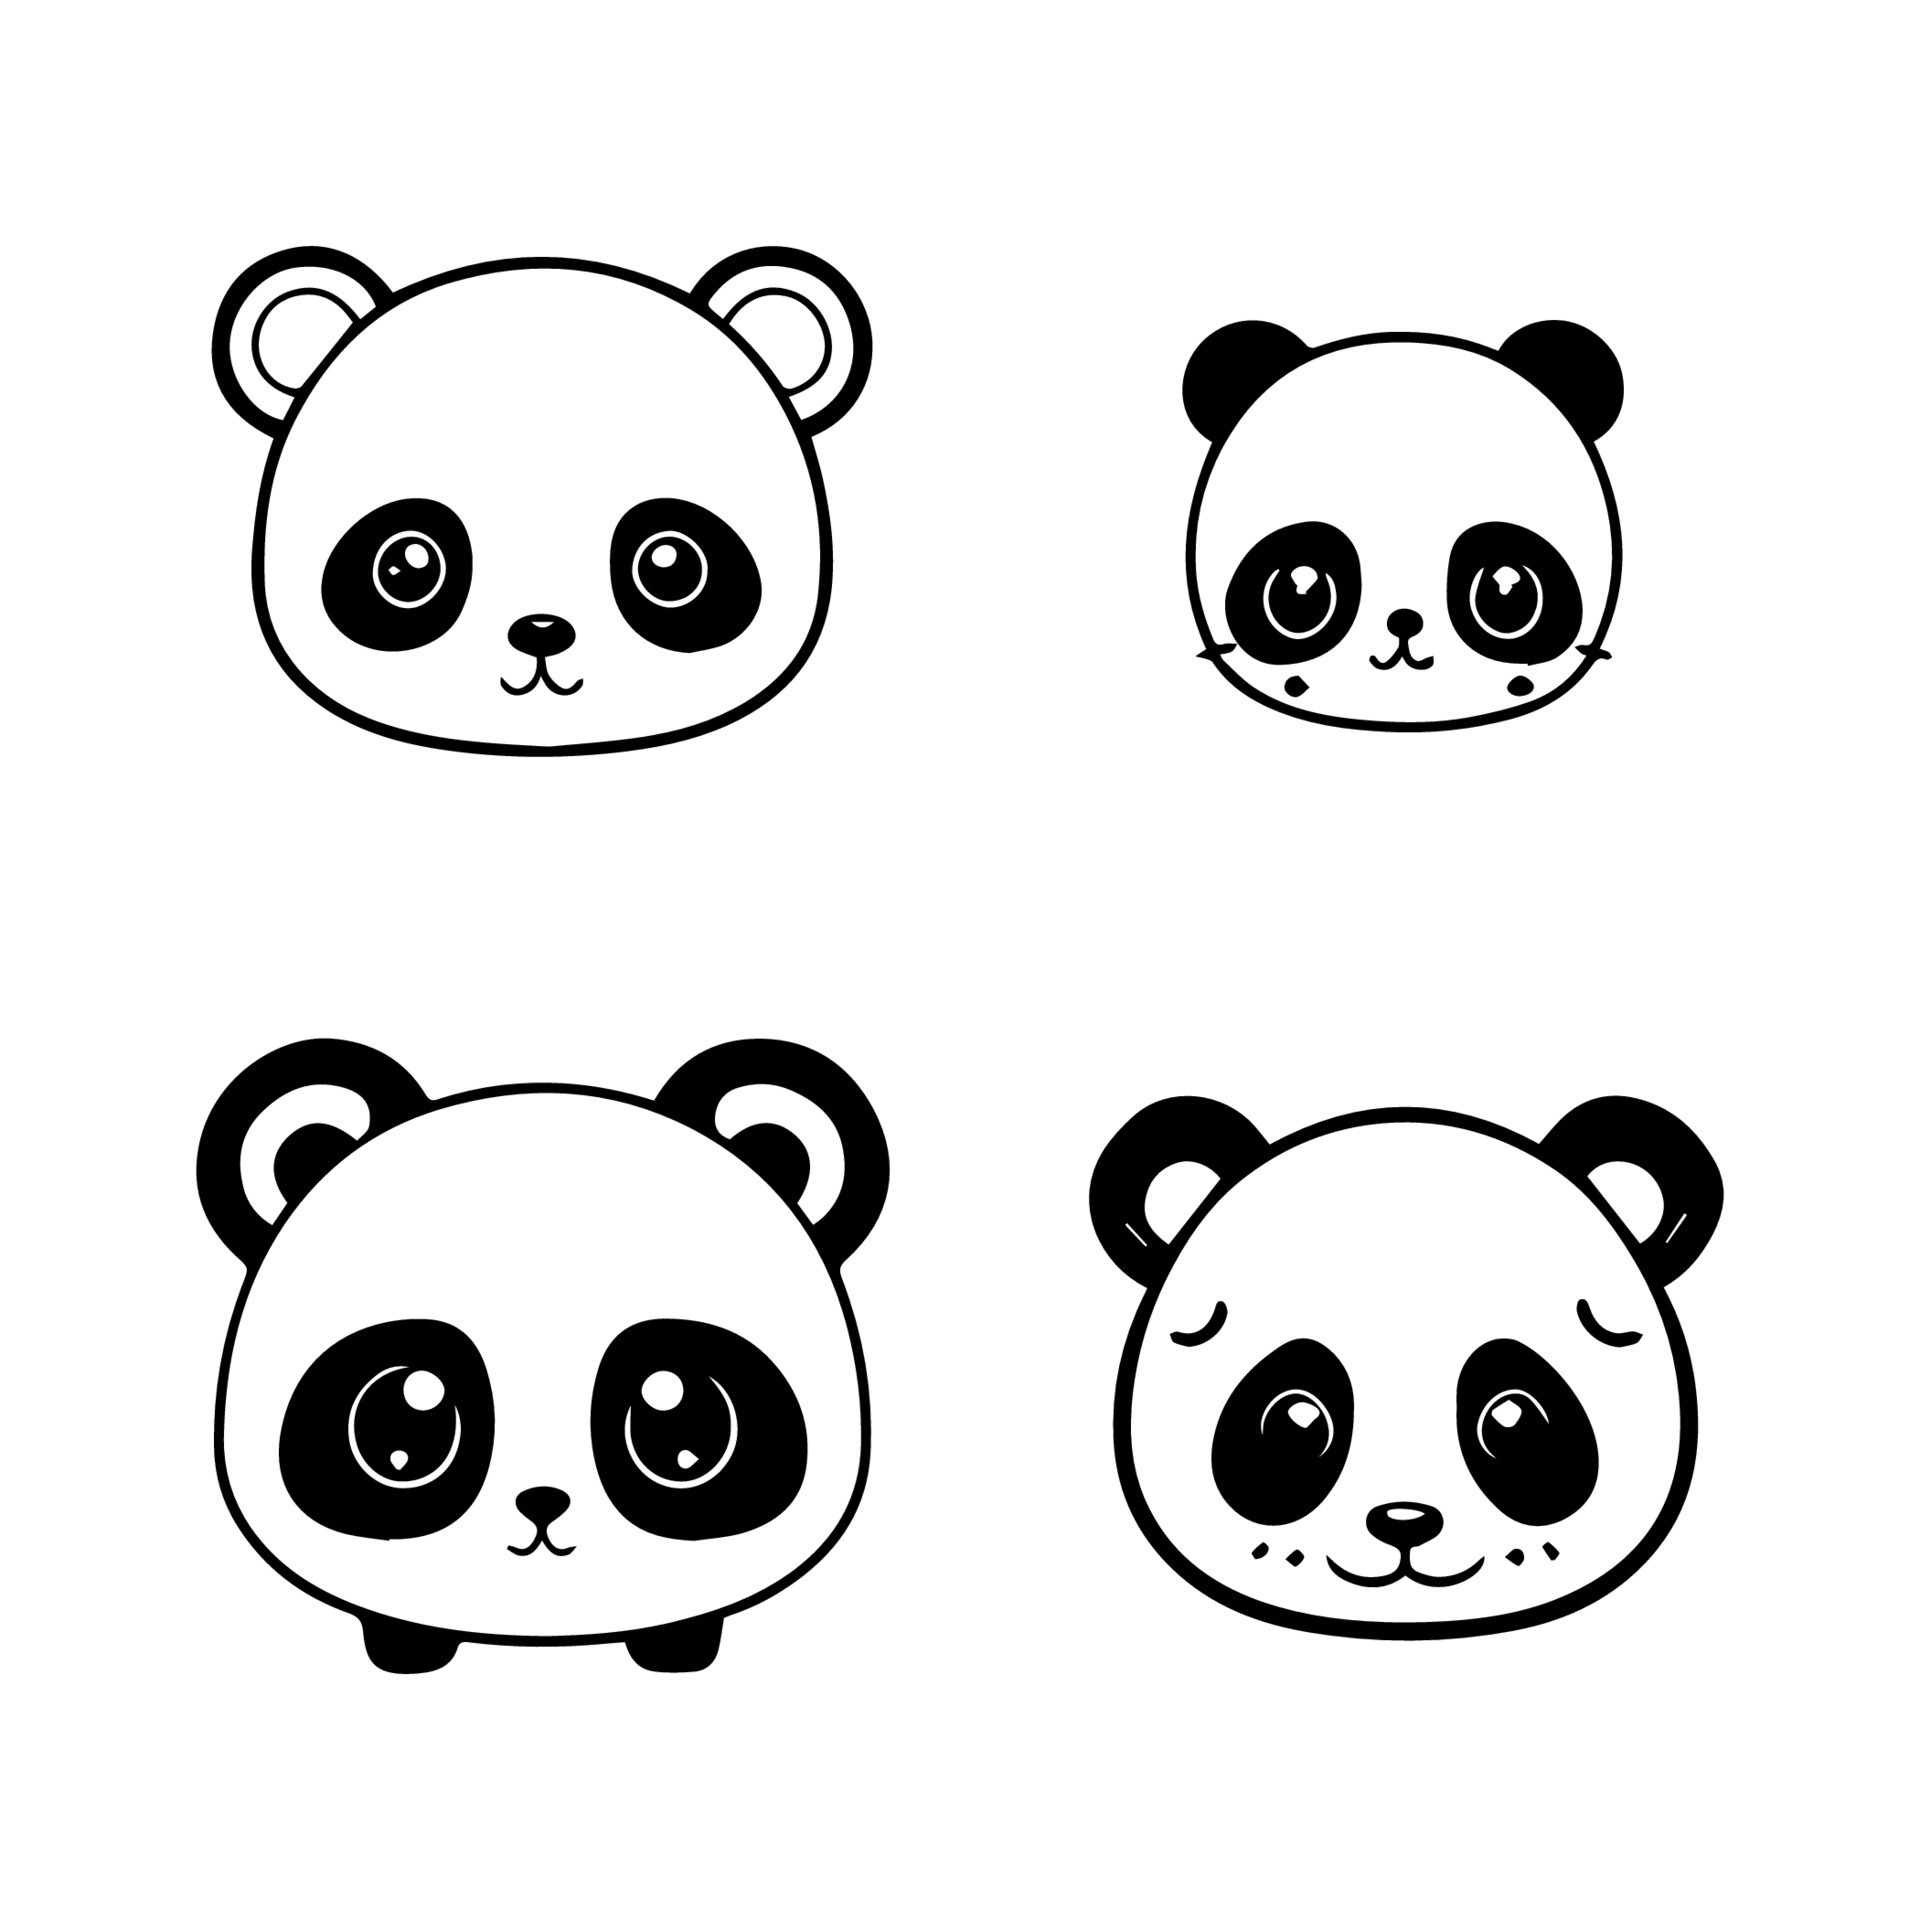 Add some playful panda power to your project with our cute kawaii